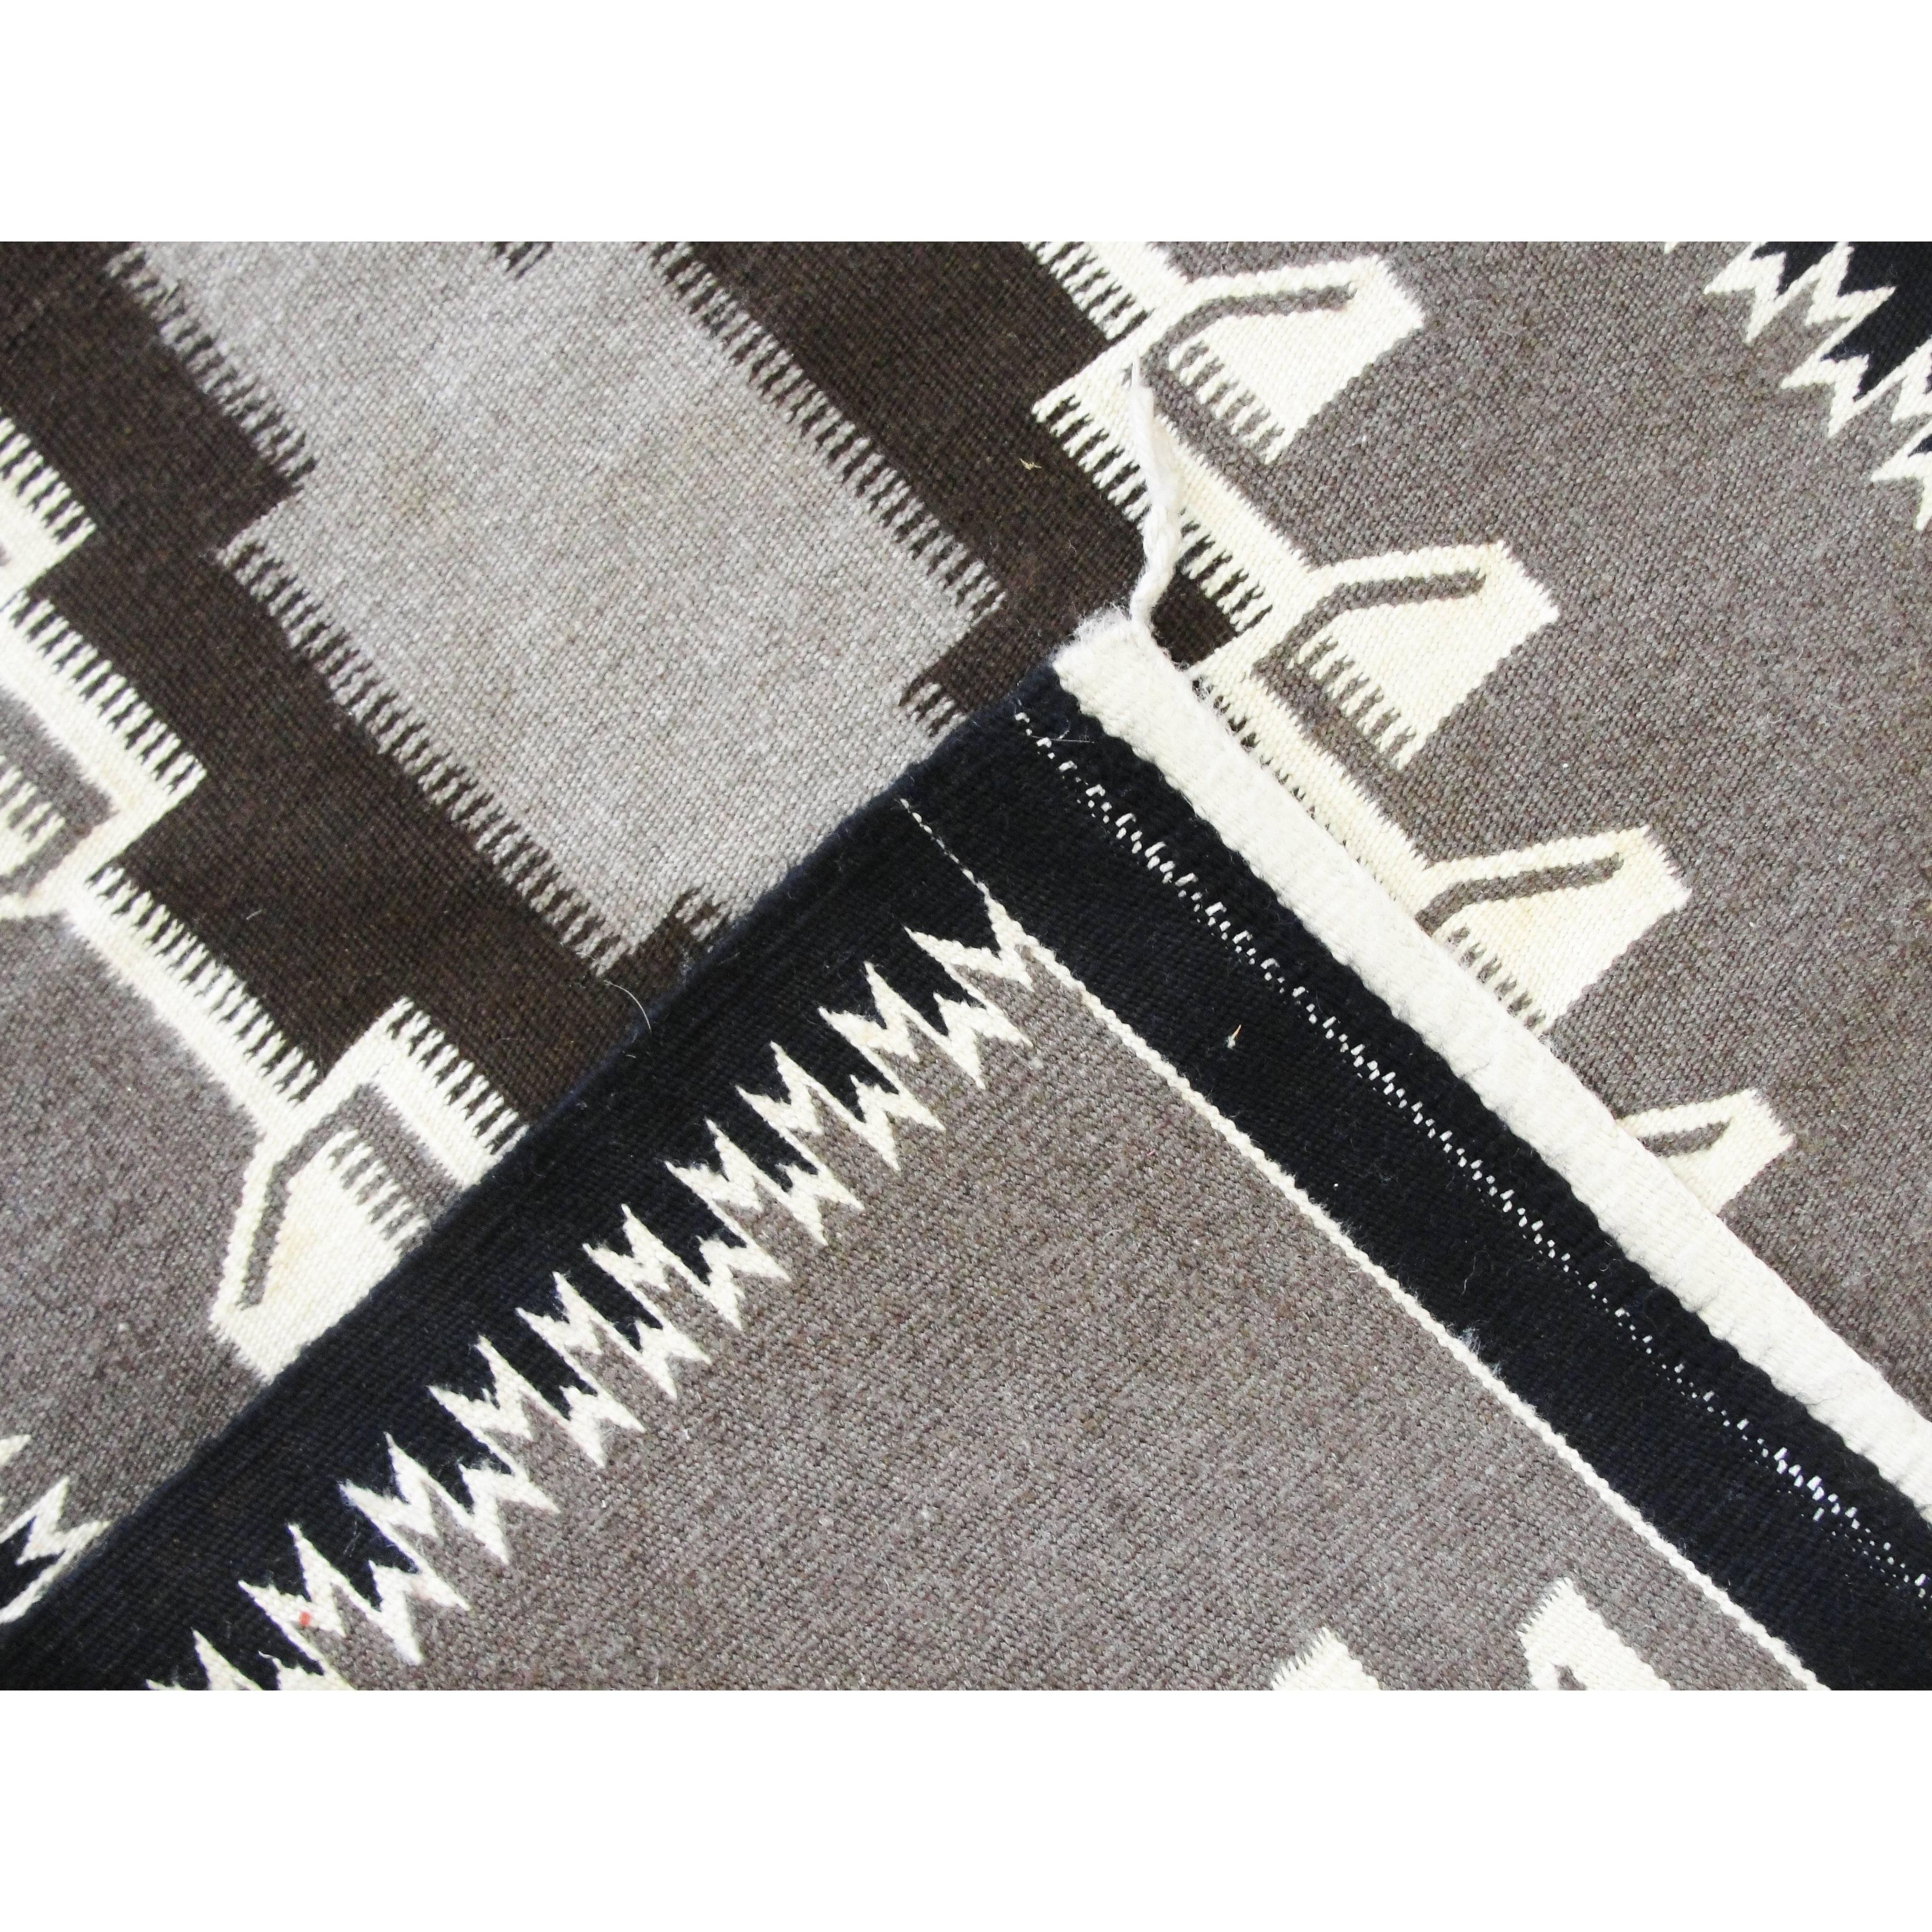 This is a really majestic, old style Two Grey Hills weaving circa 1940s or 1950s. The rug is made completely of hand-shorn wool and is hand carded and spun as well. The colors are completely natural. This is a heavy well-made weaving that has seen